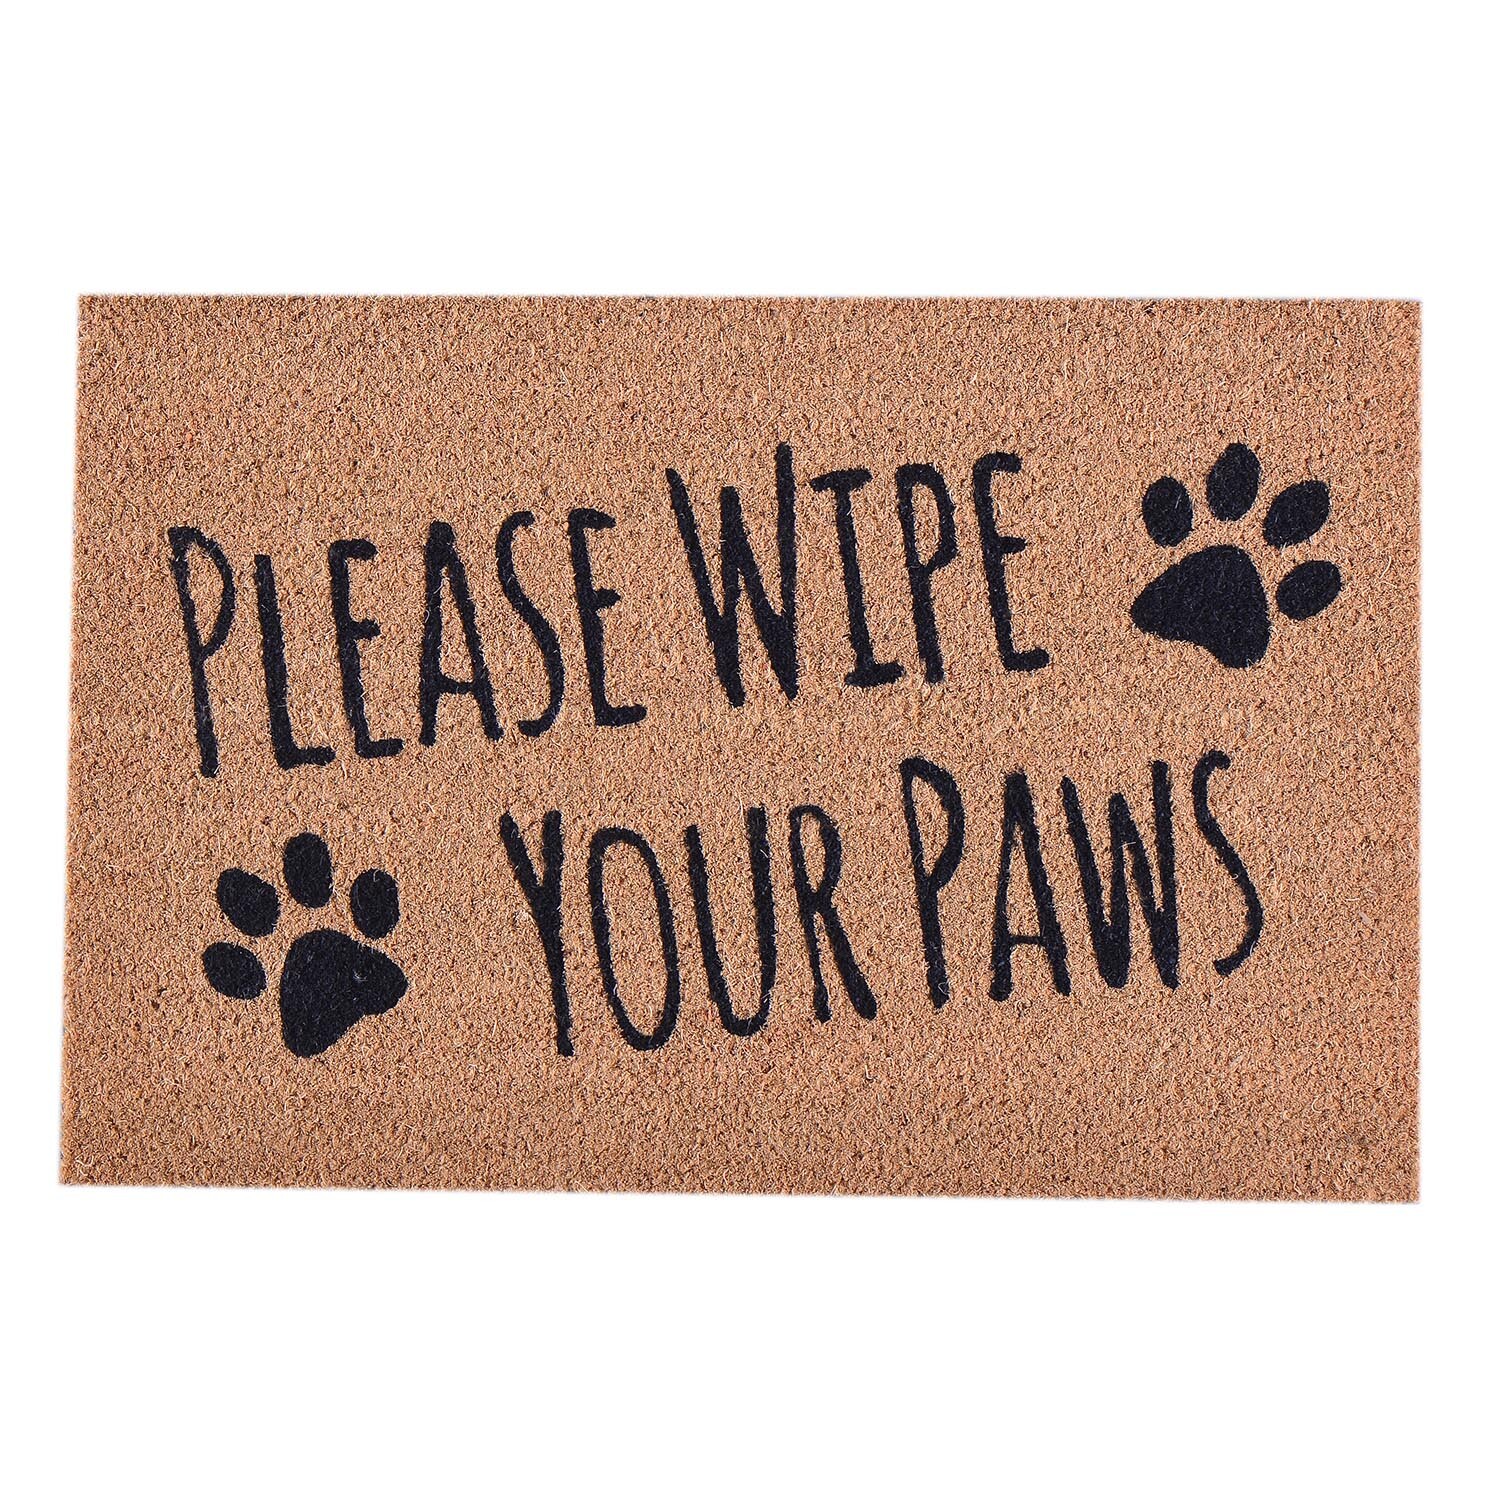 PVC Backed Please Wipe Your Paws Doormat 60 x 40cm Image 1